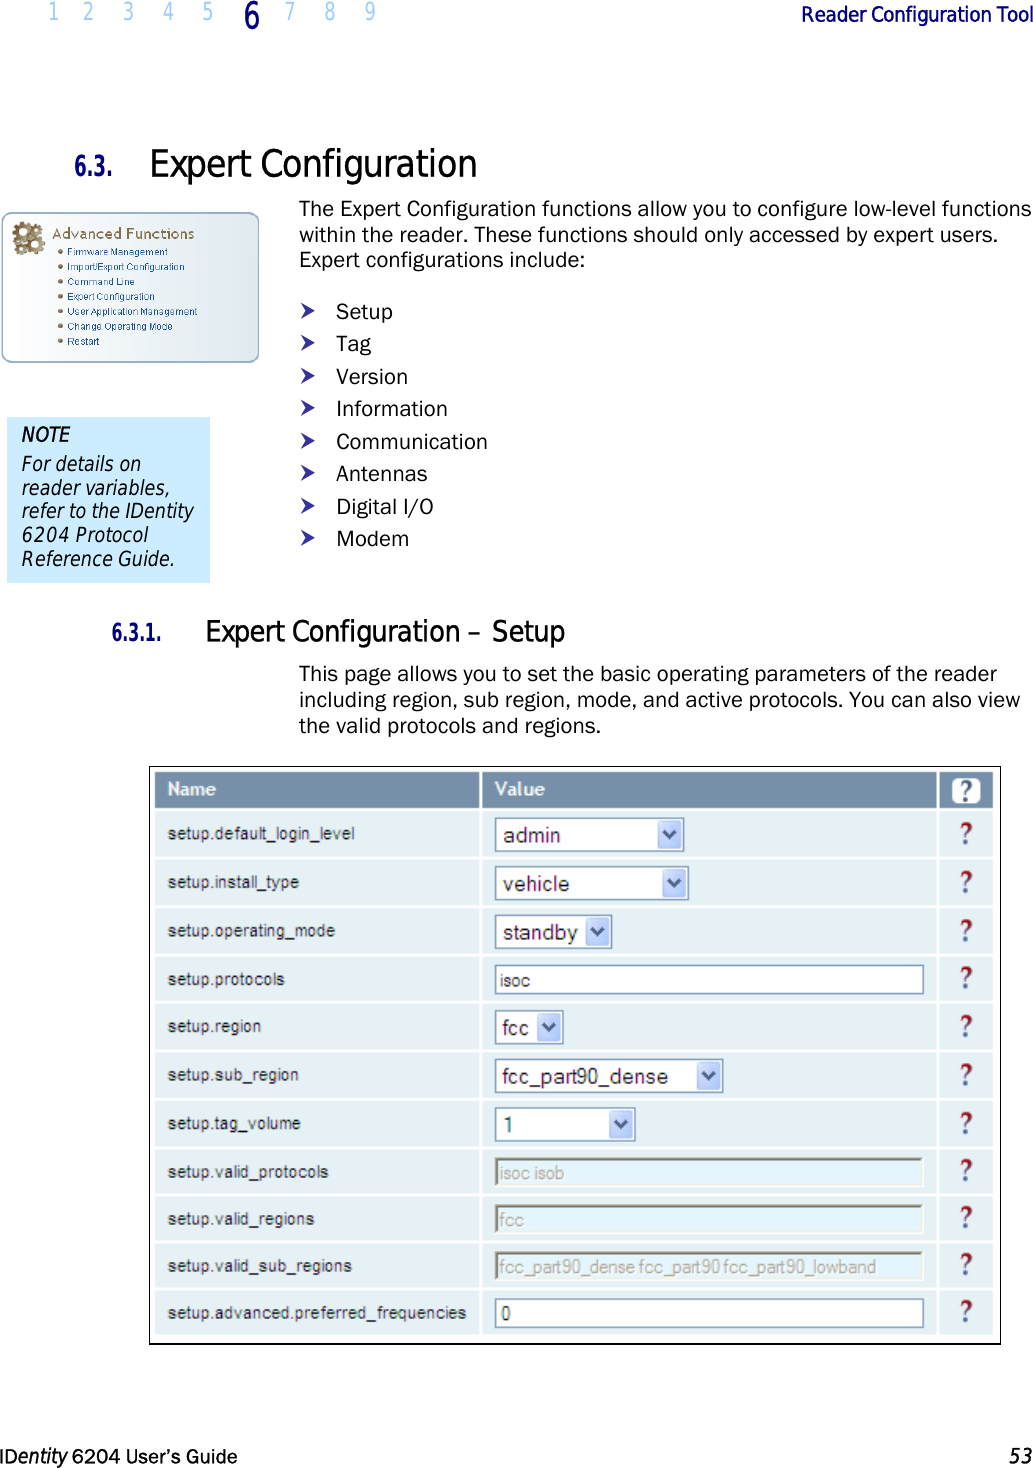  1 2 3 4 5 6  7 8 9        Reader Configuration Tool   IDentity 6204 User’s Guide  53  6.3. Expert Configuration The Expert Configuration functions allow you to configure low-level functions within the reader. These functions should only accessed by expert users. Expert configurations include: h Setup h Tag h Version h Information h Communication h Antennas h Digital I/O h Modem  6.3.1. Expert Configuration – Setup This page allows you to set the basic operating parameters of the reader including region, sub region, mode, and active protocols. You can also view the valid protocols and regions.  NOTE For details on reader variables, refer to the IDentity 6204 Protocol Reference Guide. 